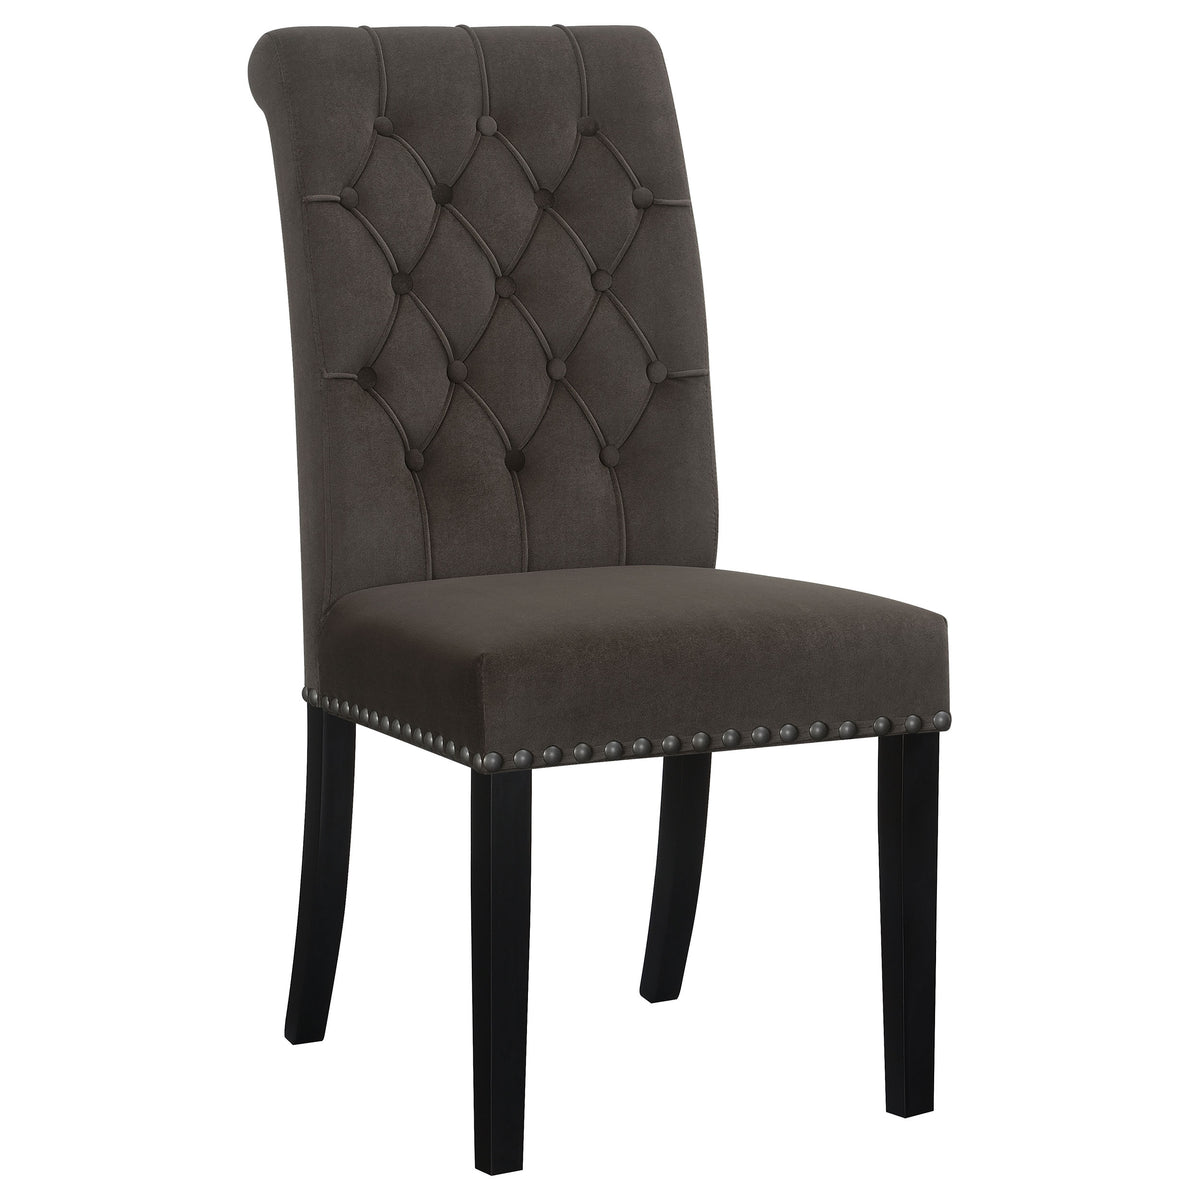 Alana Upholstered Tufted Side Chairs with Nailhead Trim (Set of 2) - Half Price Furniture